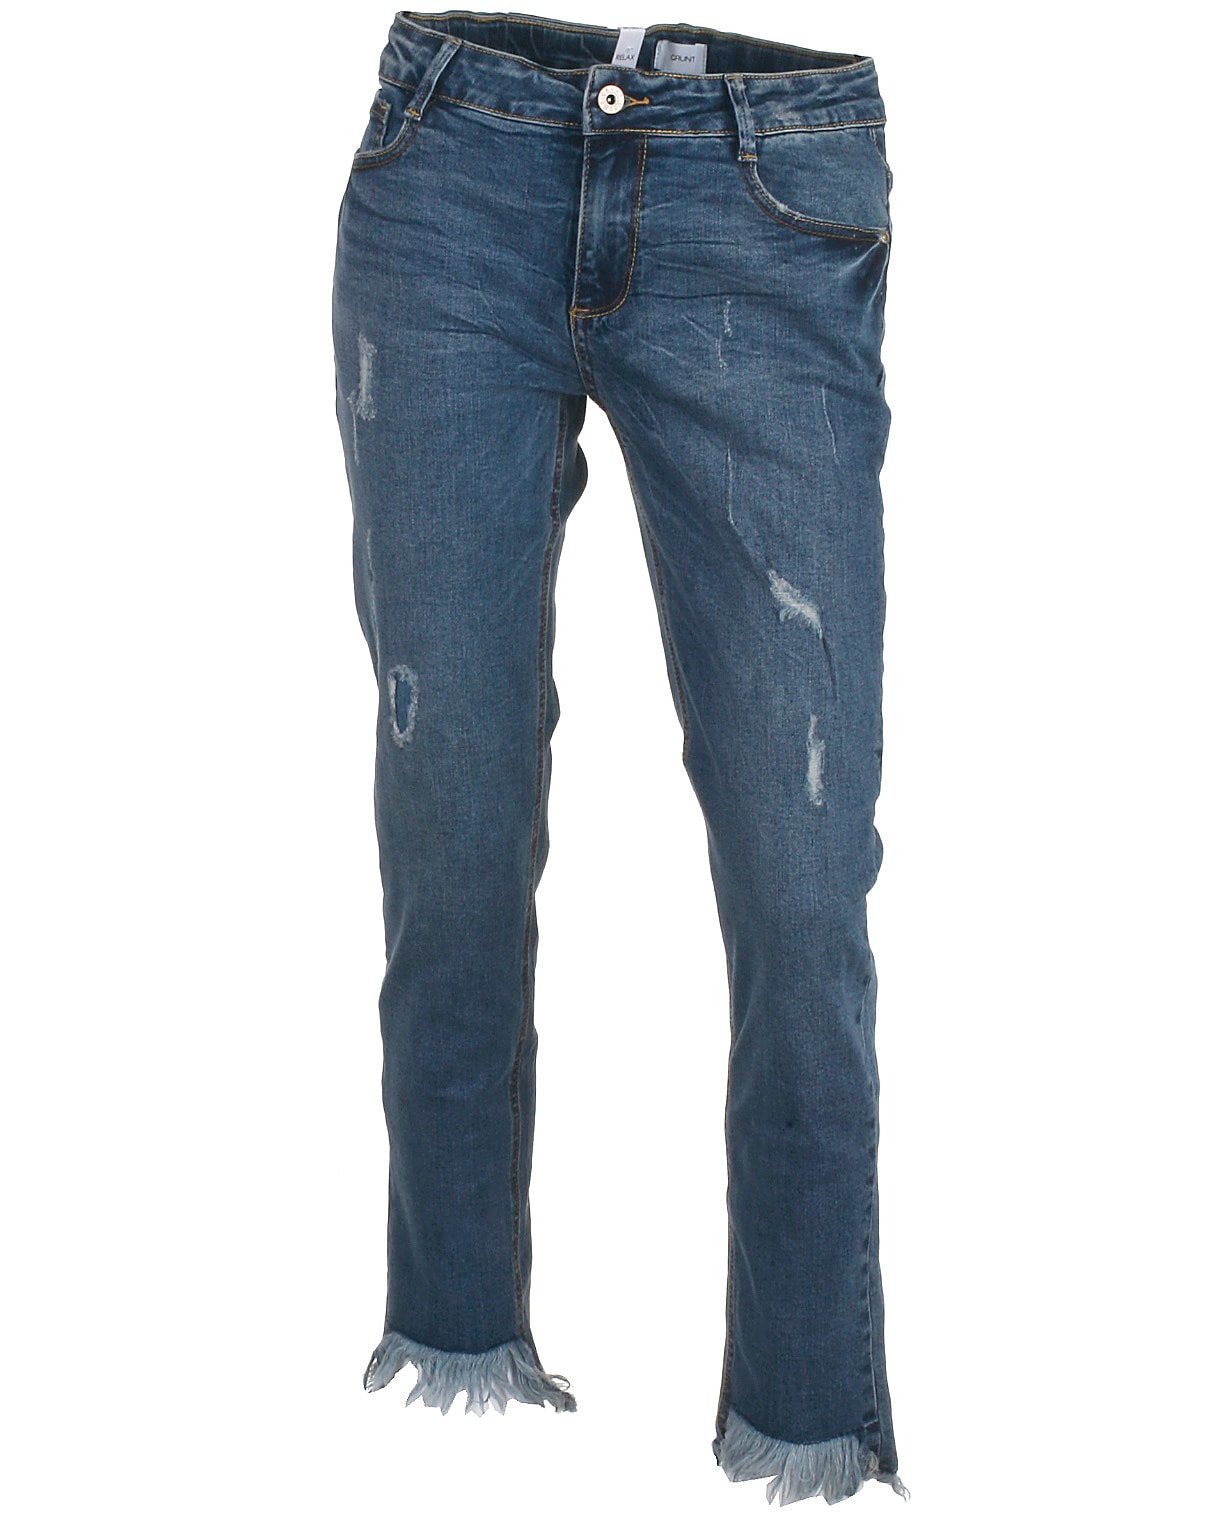 Grunt relax jeans